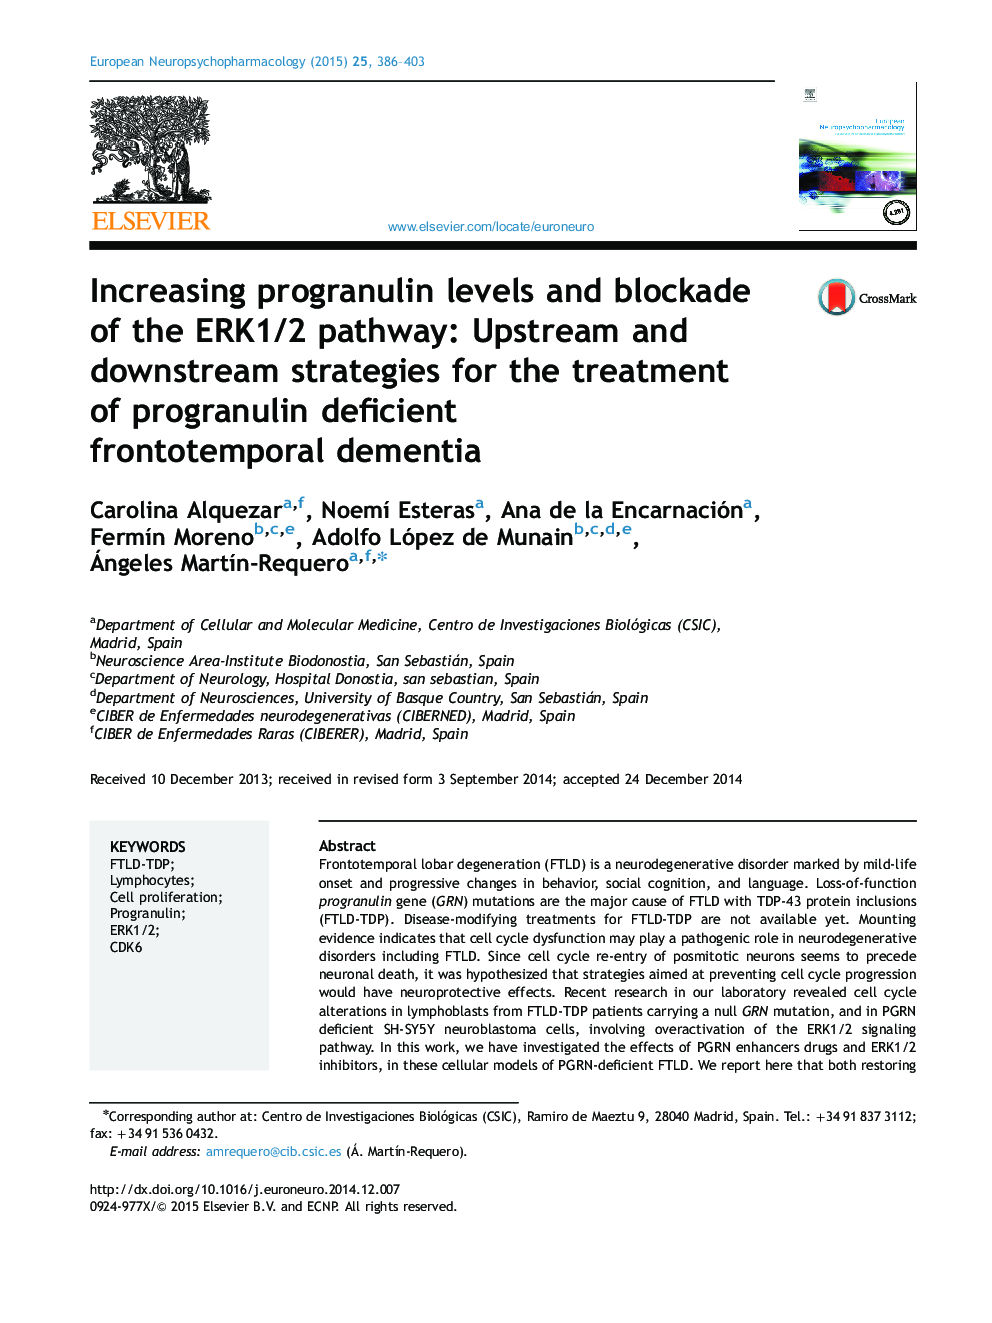 Increasing progranulin levels and blockade of the ERK1/2 pathway: Upstream and downstream strategies for the treatment of progranulin deficient frontotemporal dementia